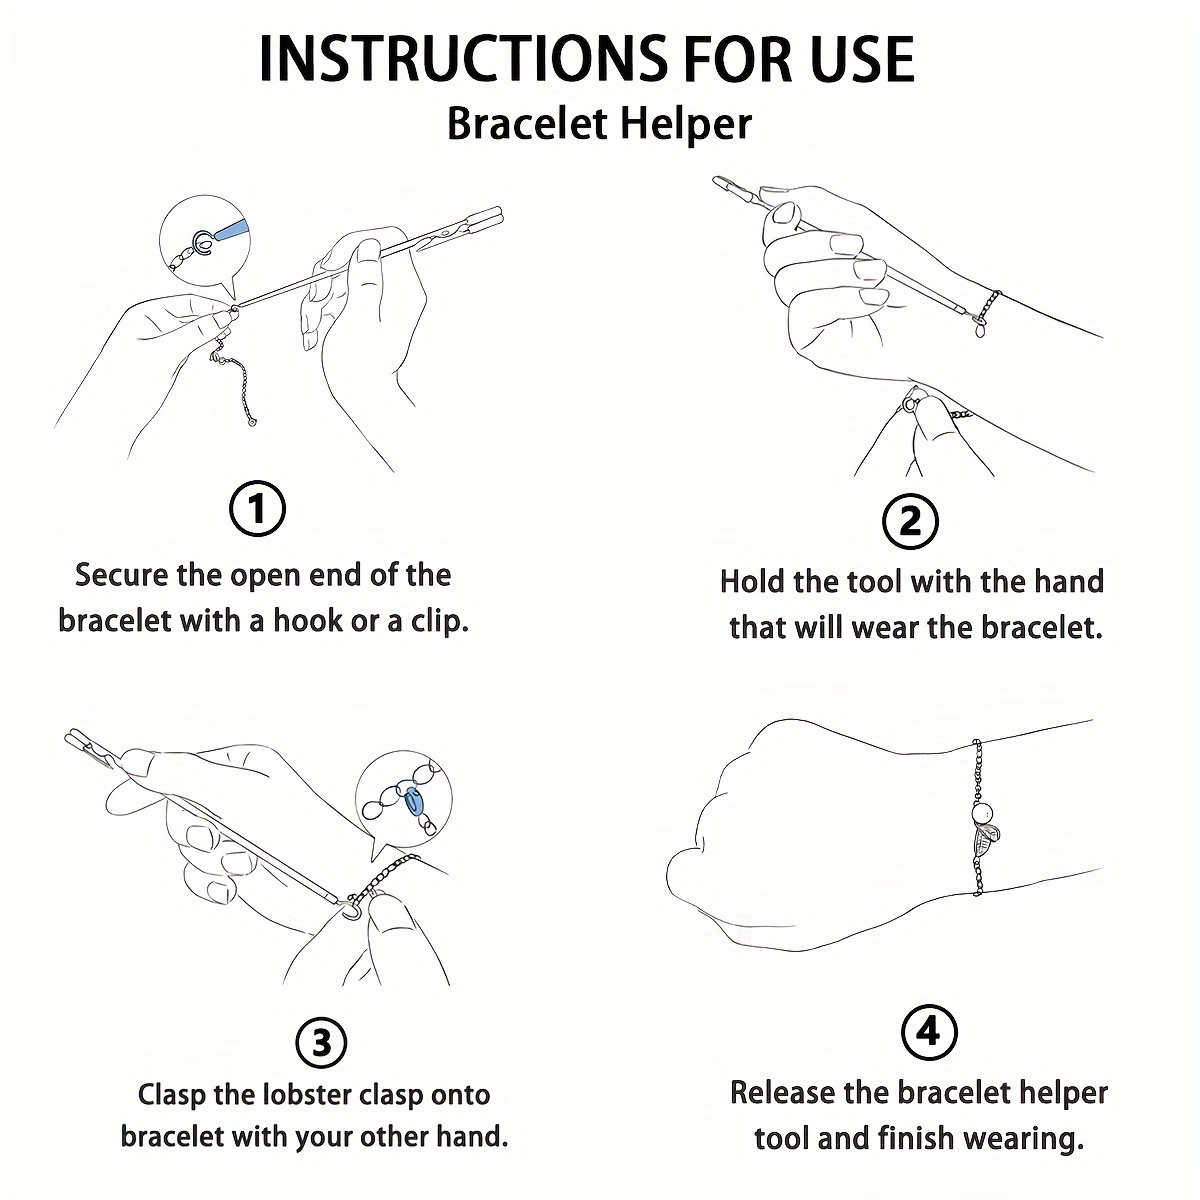 Instructions on How to Use Bracelet Helper Tool 